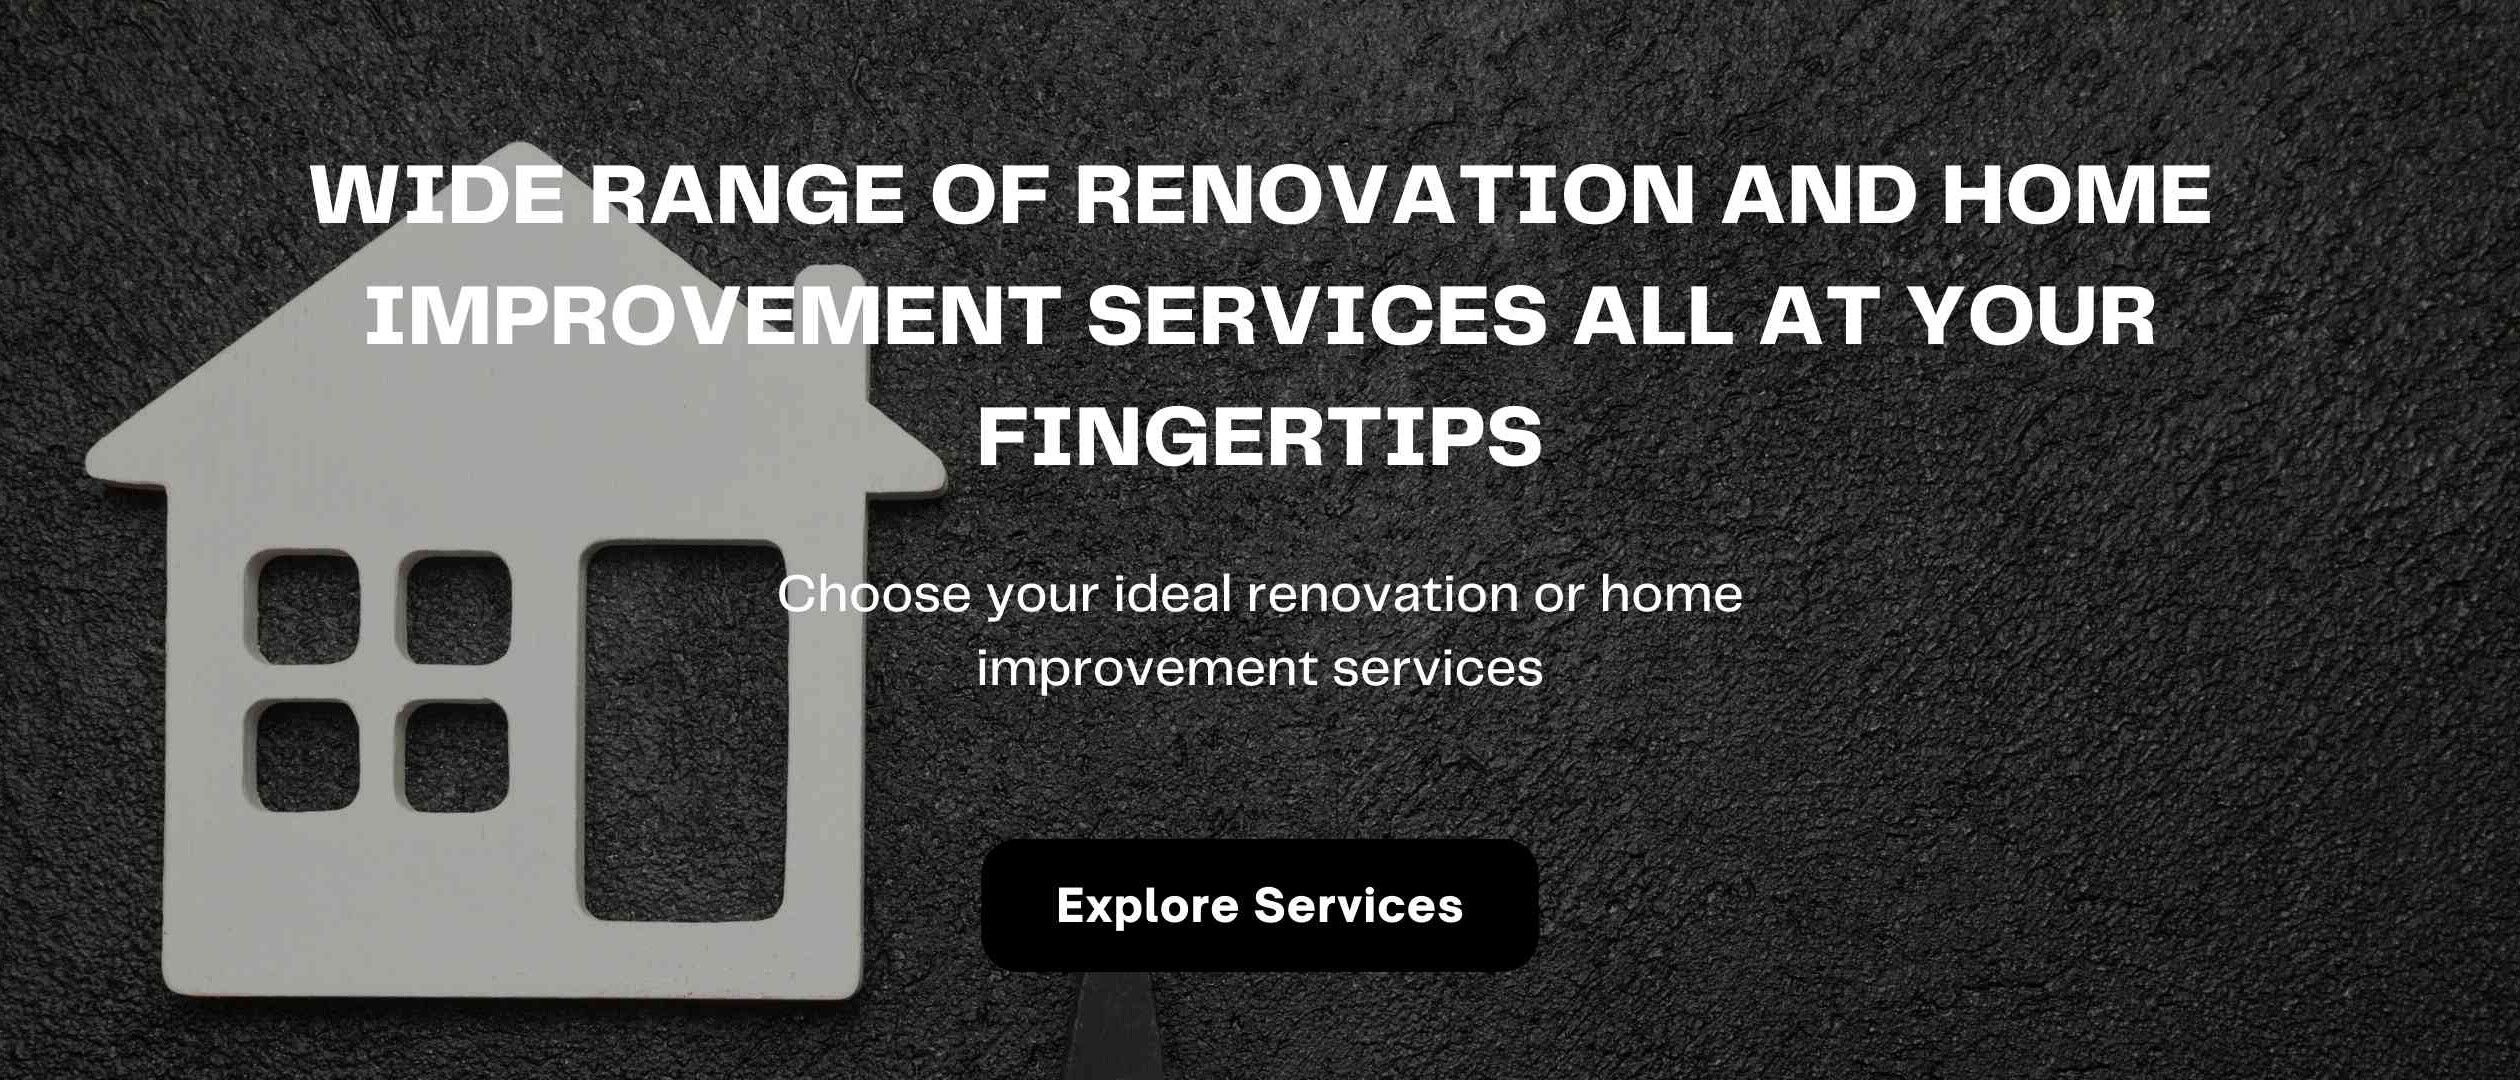 Find Renovation Services in Malaysia